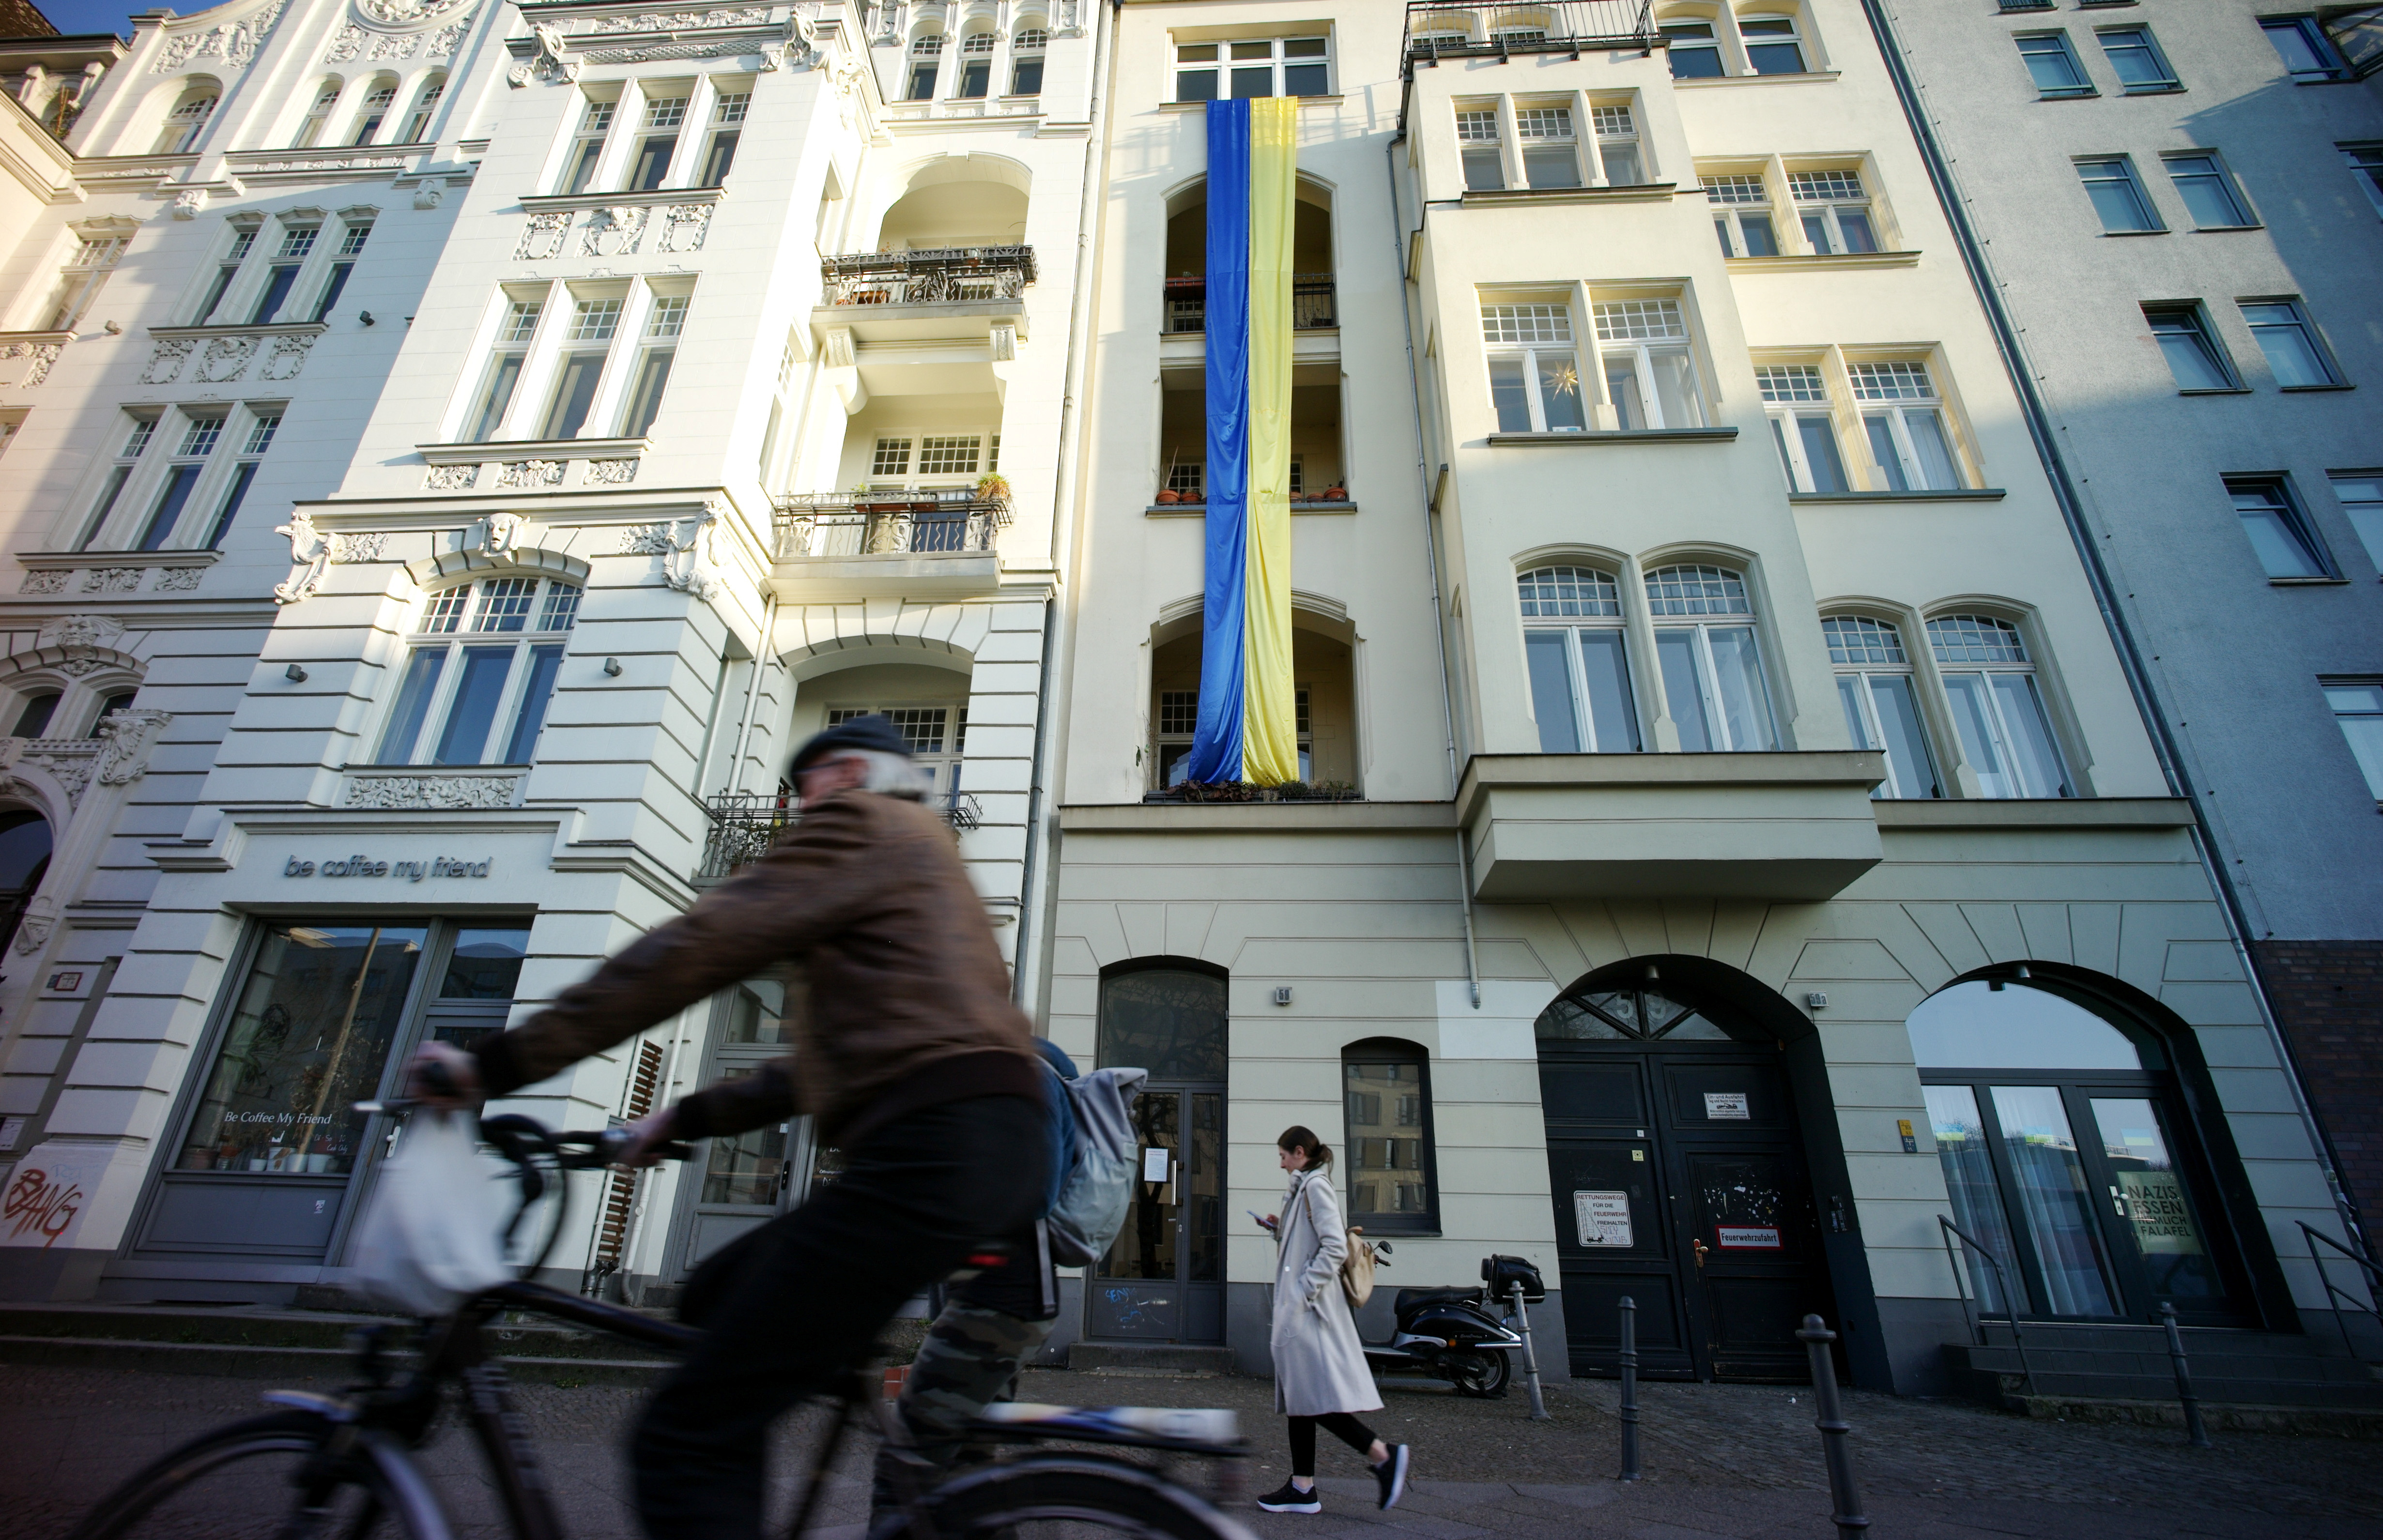 Pedestrians walk past a Ukrainian flag hanging in support of the country on an apartment building in Berlin